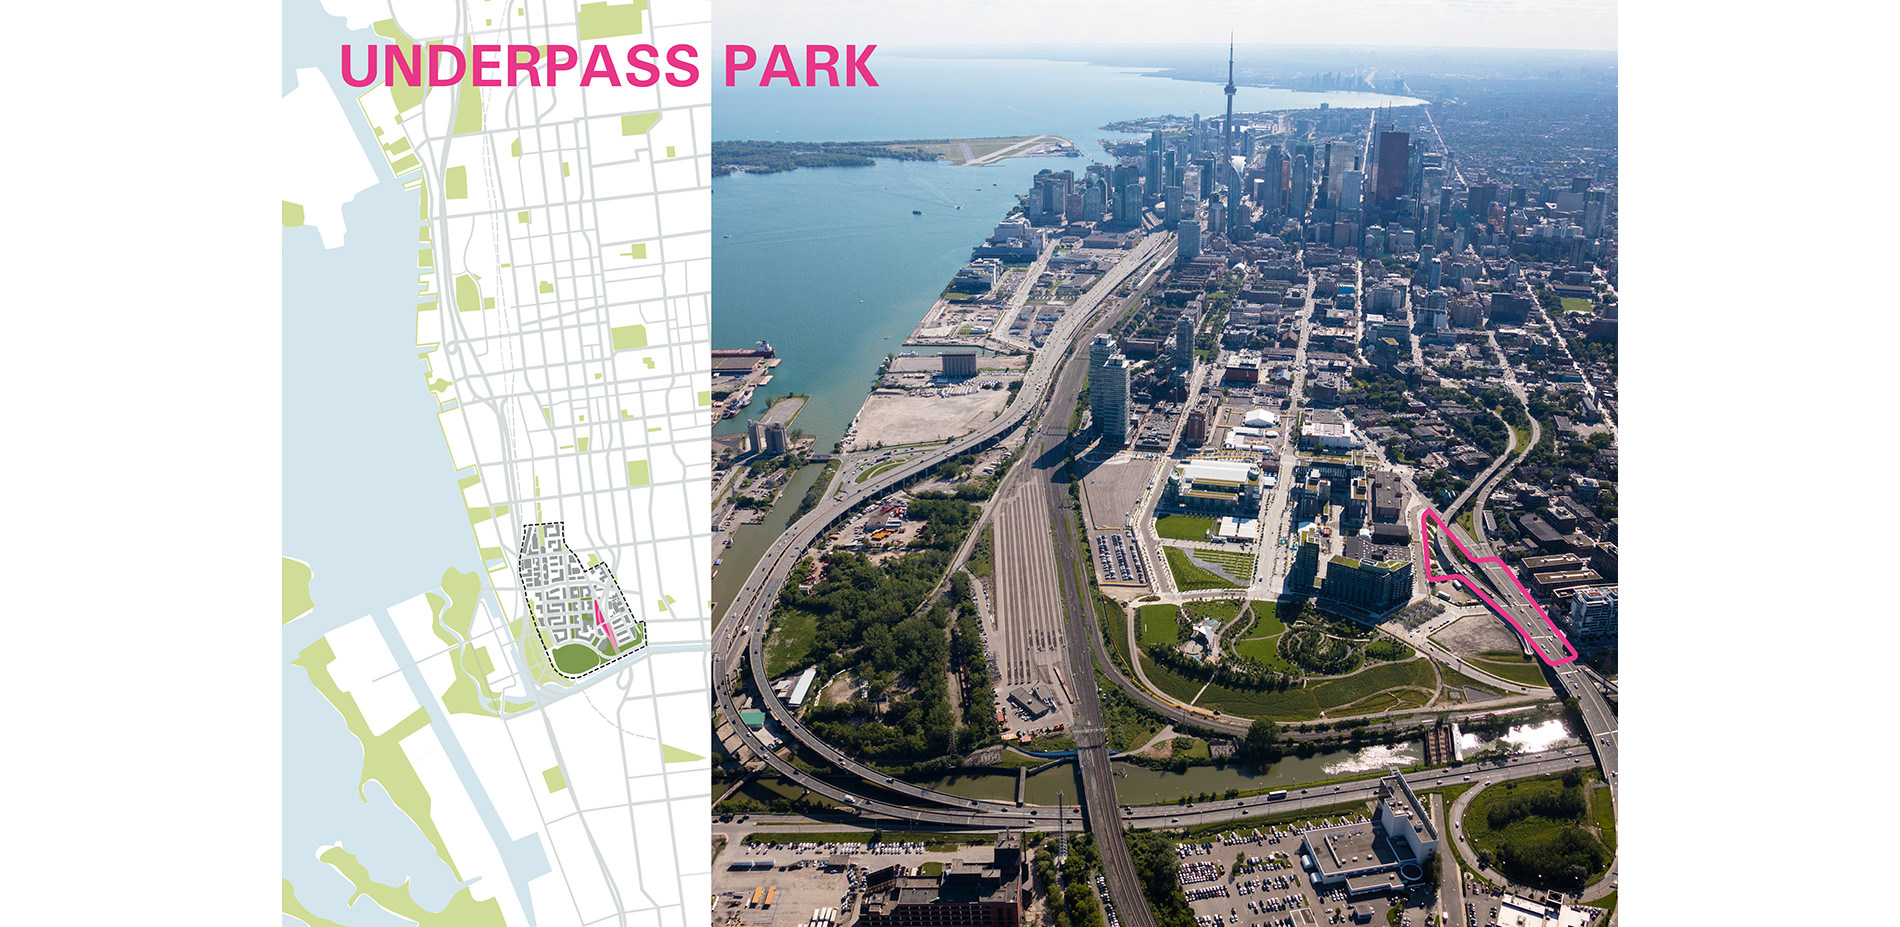 Map and Aerial View of Underpass Park